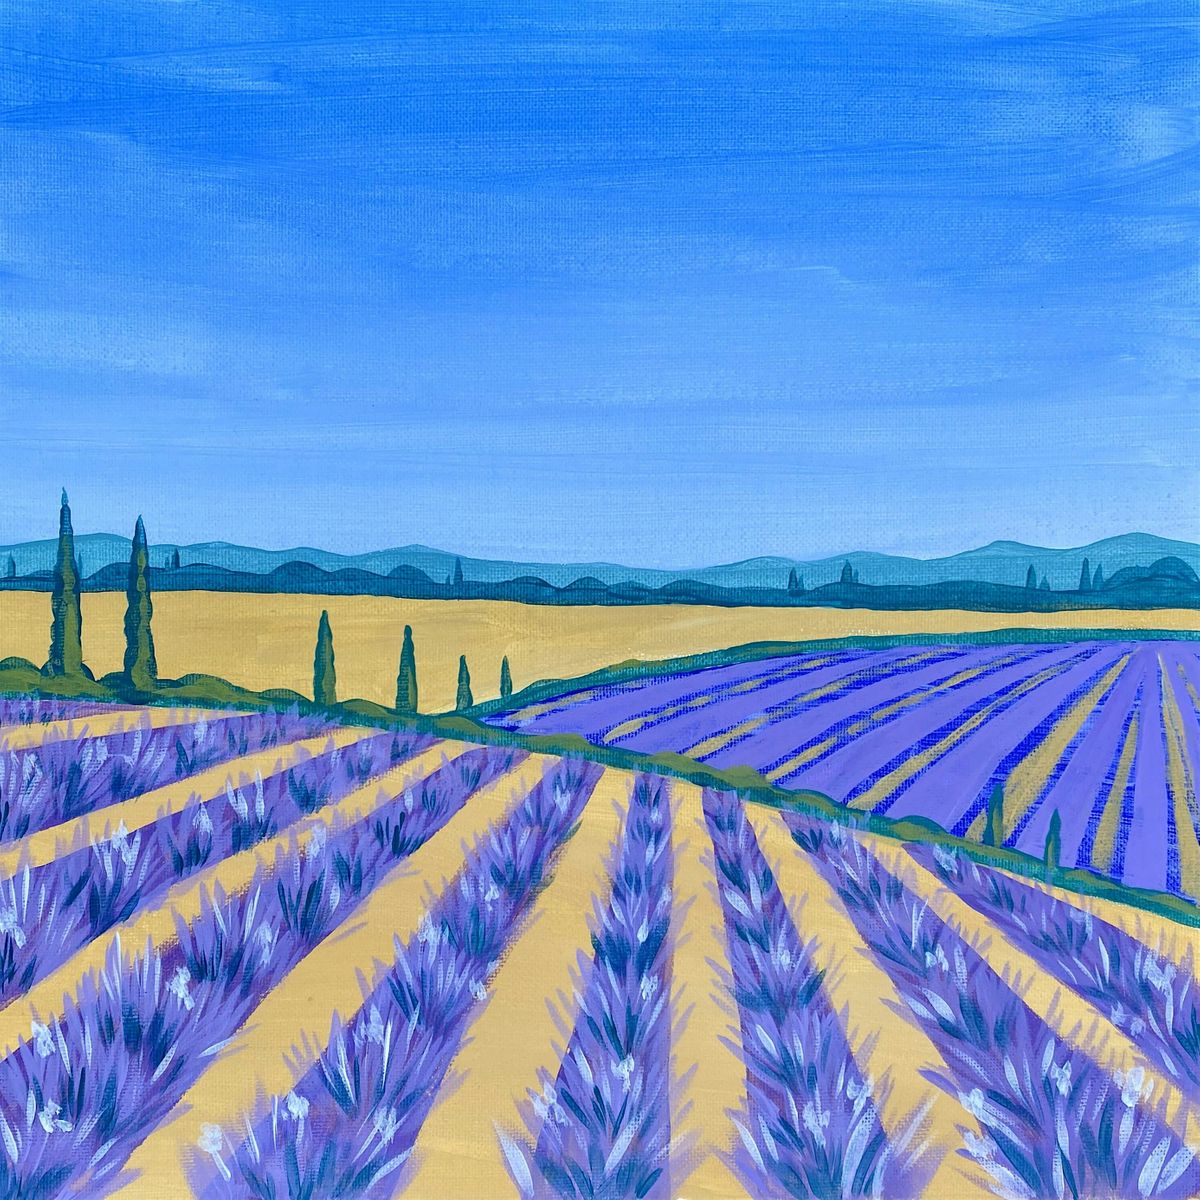 Paint & Unwind at the Tobacco Factory, Bristol - "Lavender Fields"